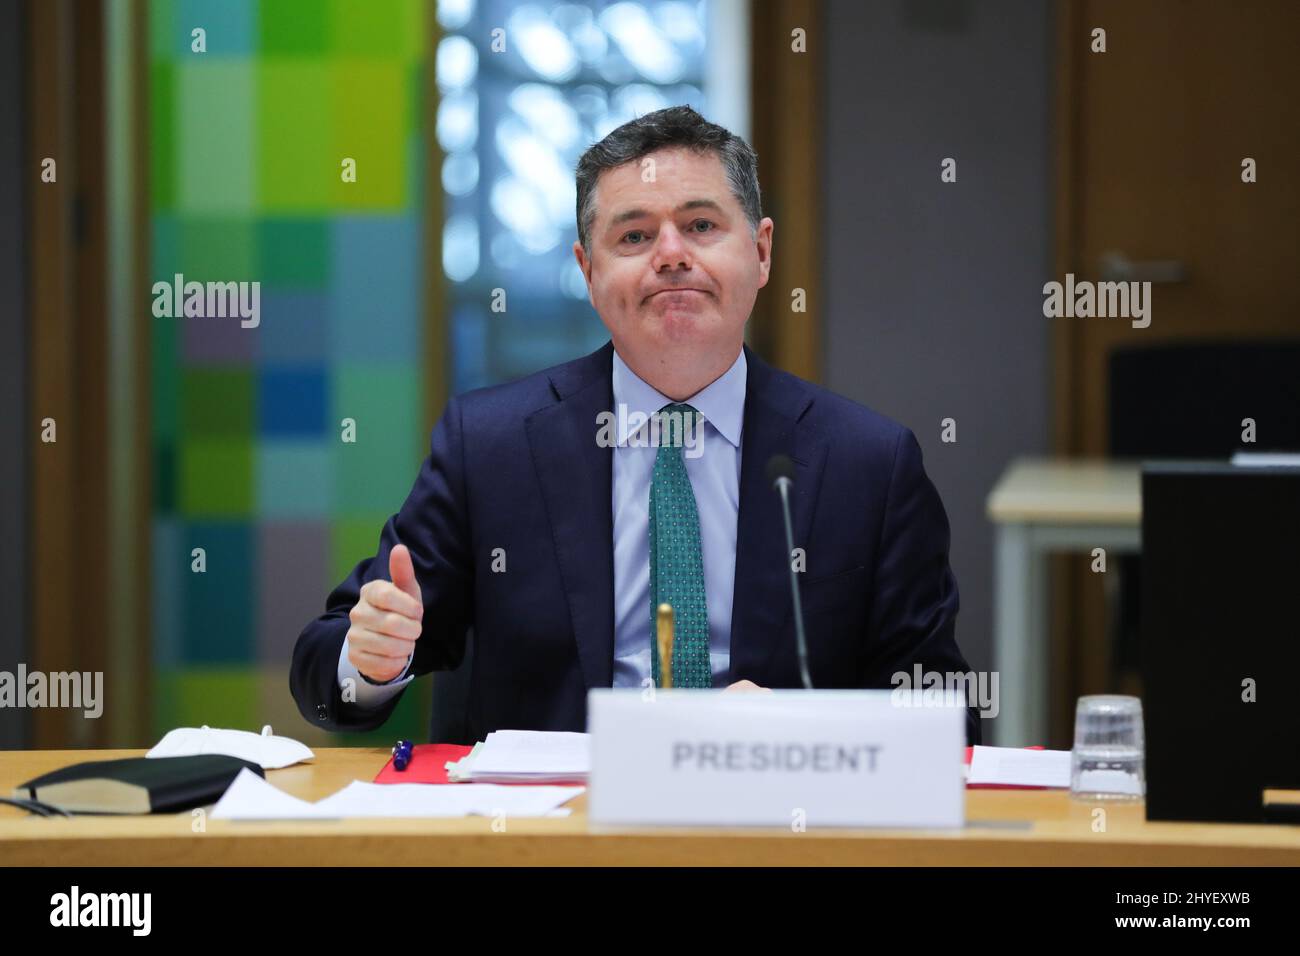 Brussels, Belgium. 14th Mar, 2022. Paschal Donohoe, president of the Eurogroup, chairs a meeting of the Eurogroup in Brussels, Belgium, March 14, 2022. The Euro area will mitigate the impact of the Russia-Ukraine conflict on its economy by closely monitoring the situation and by promptly adjusting its fiscal policy if needed, said officials on Monday evening after a meeting of the Eurogroup. Credit: Zheng Huansong/Xinhua/Alamy Live News Stock Photo